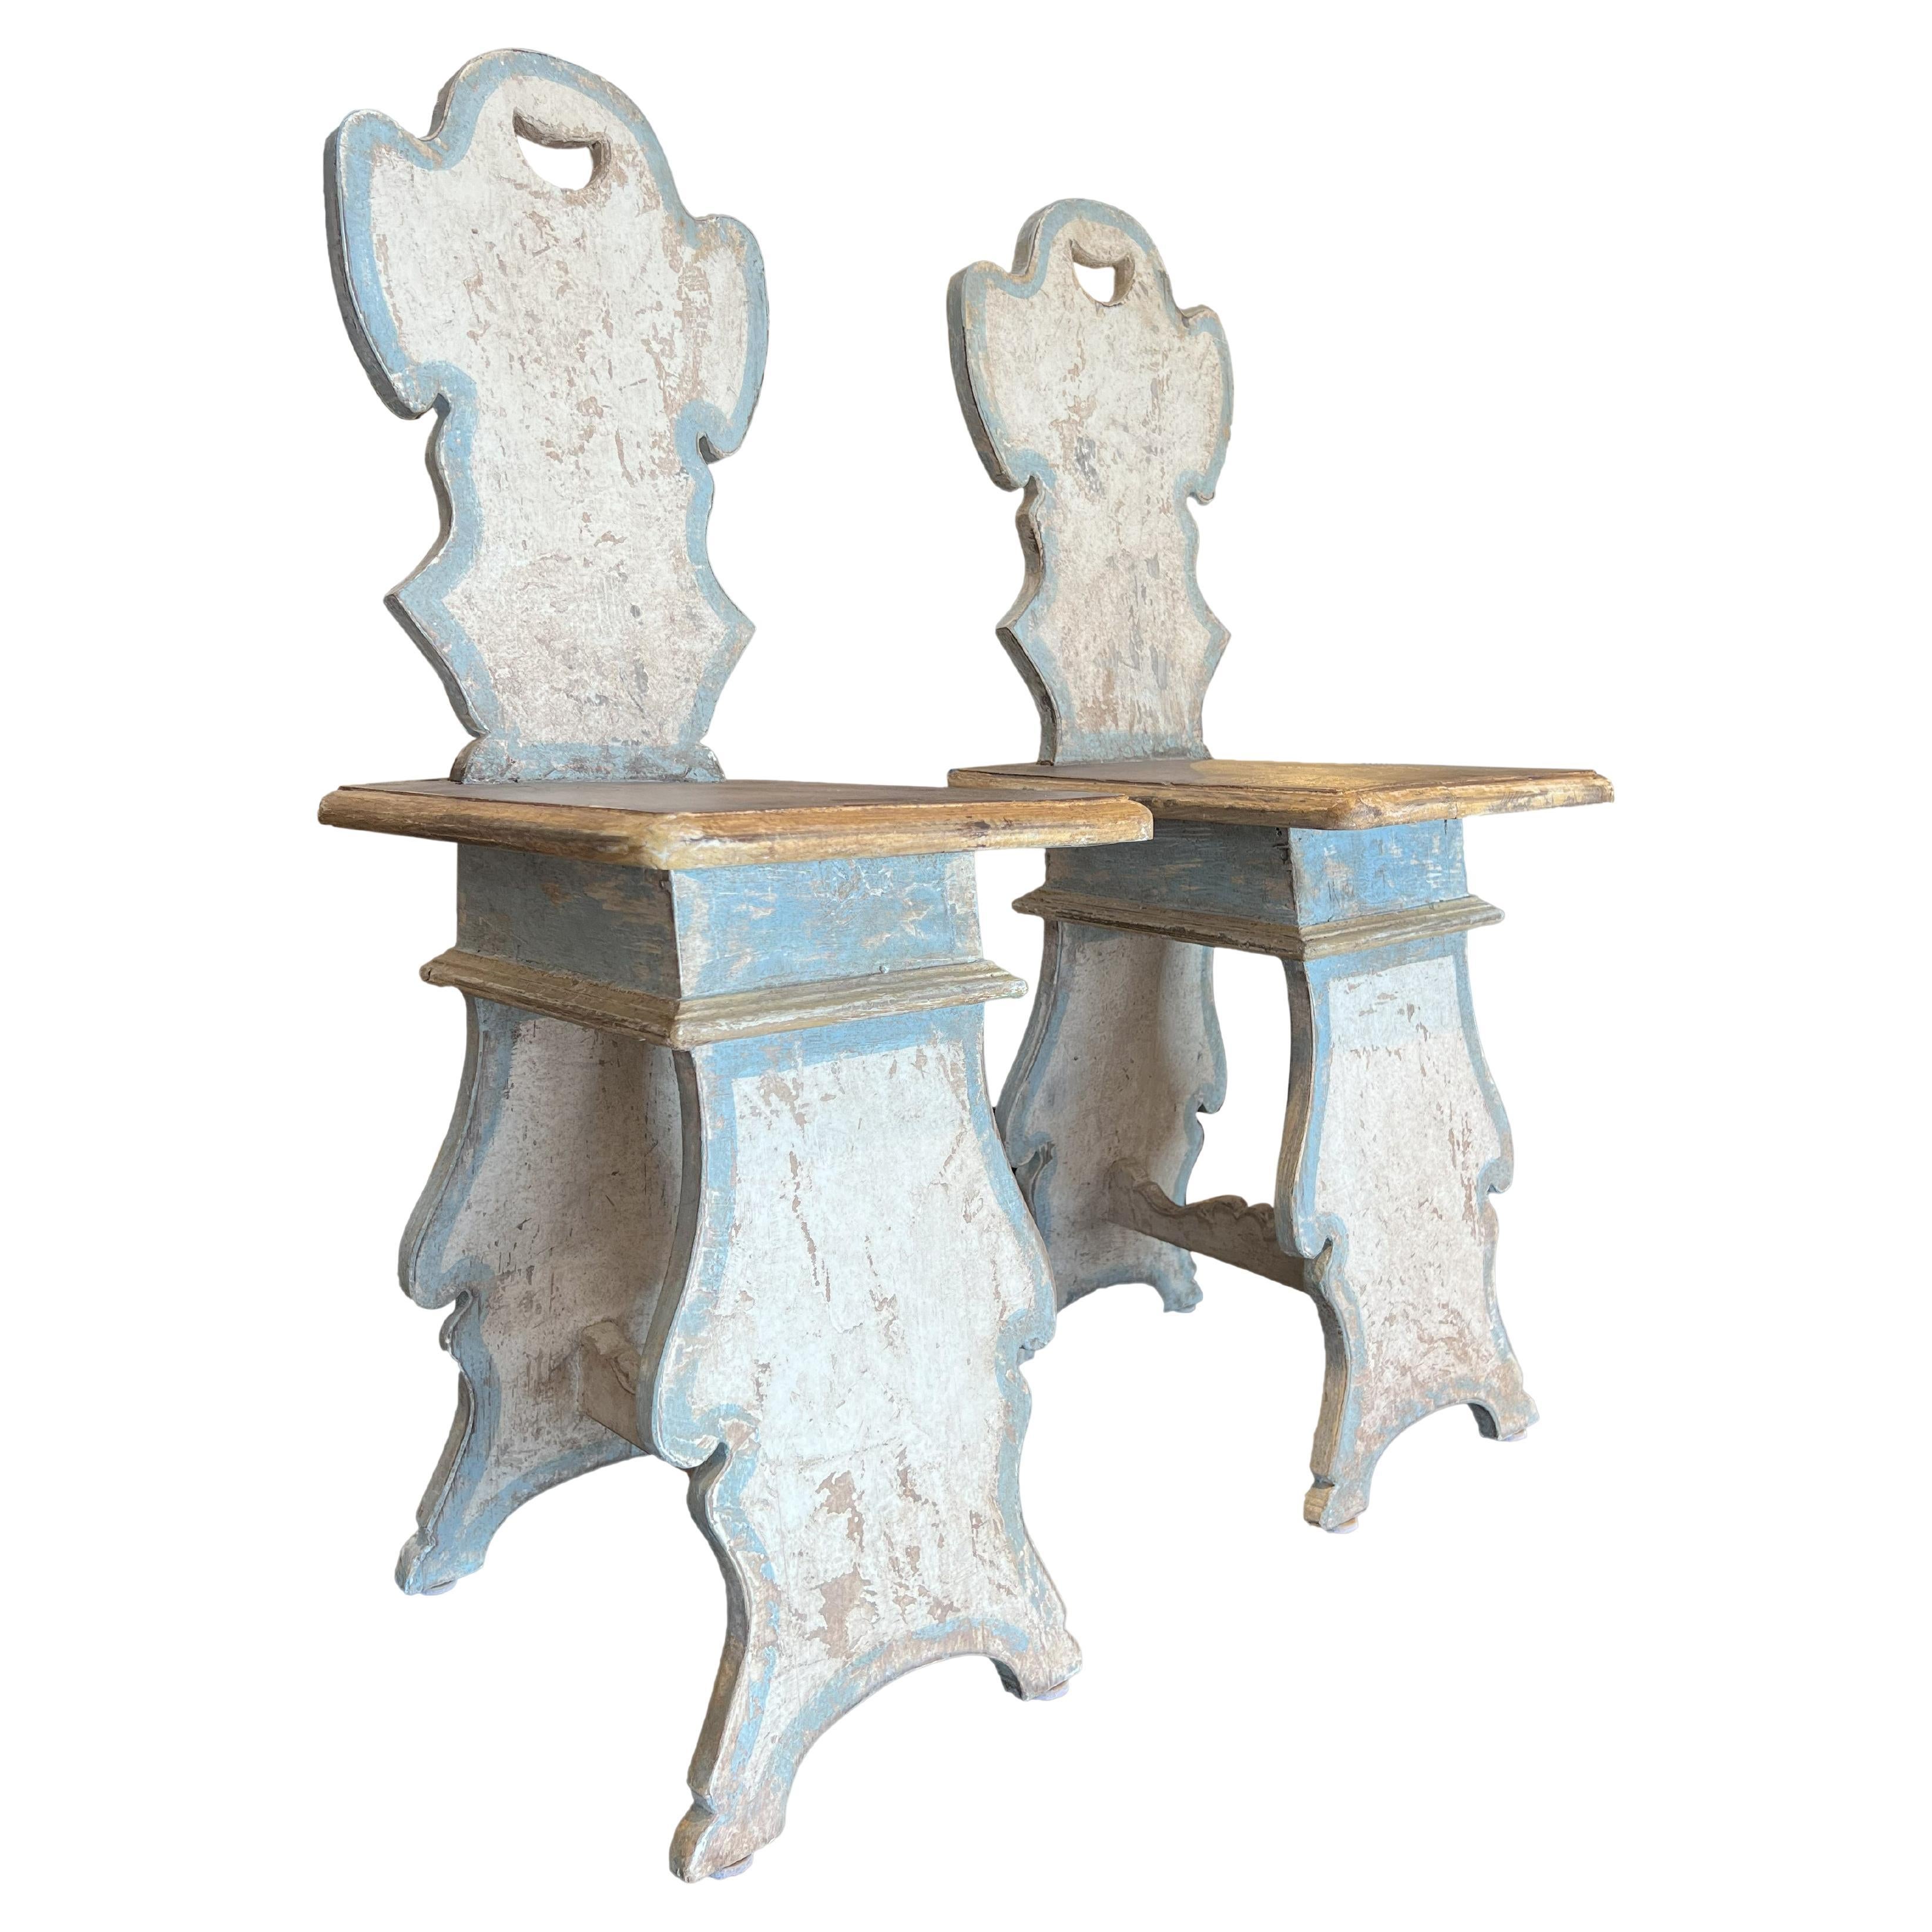 Italian 17th Century Style Pair of Tuscan "Sgabelli" Painted Stools